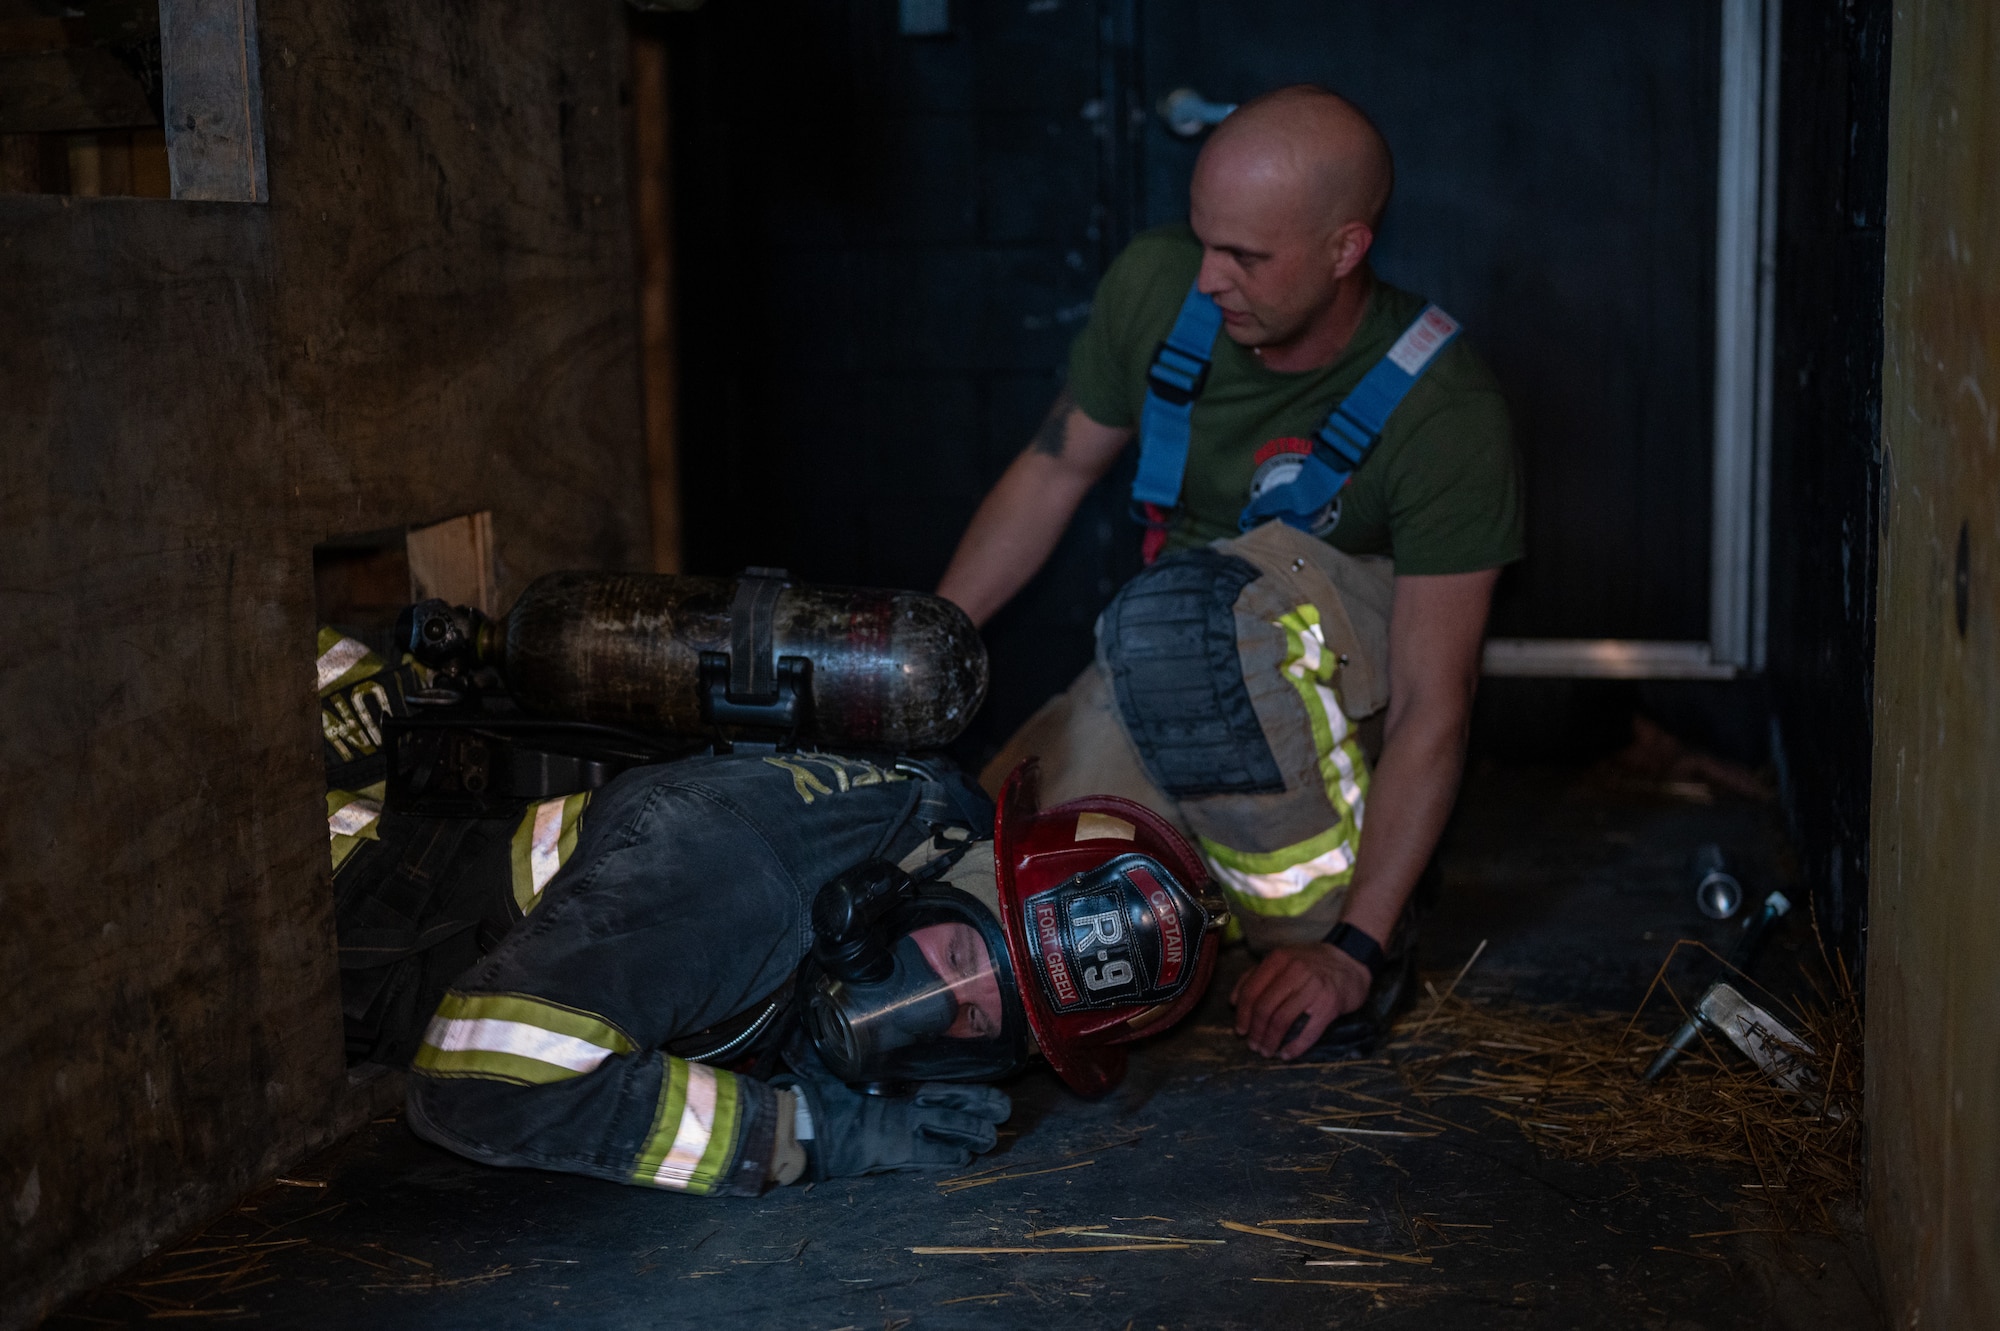 A firefighter crawls out of a confined space. In the background, another man observes his technique.